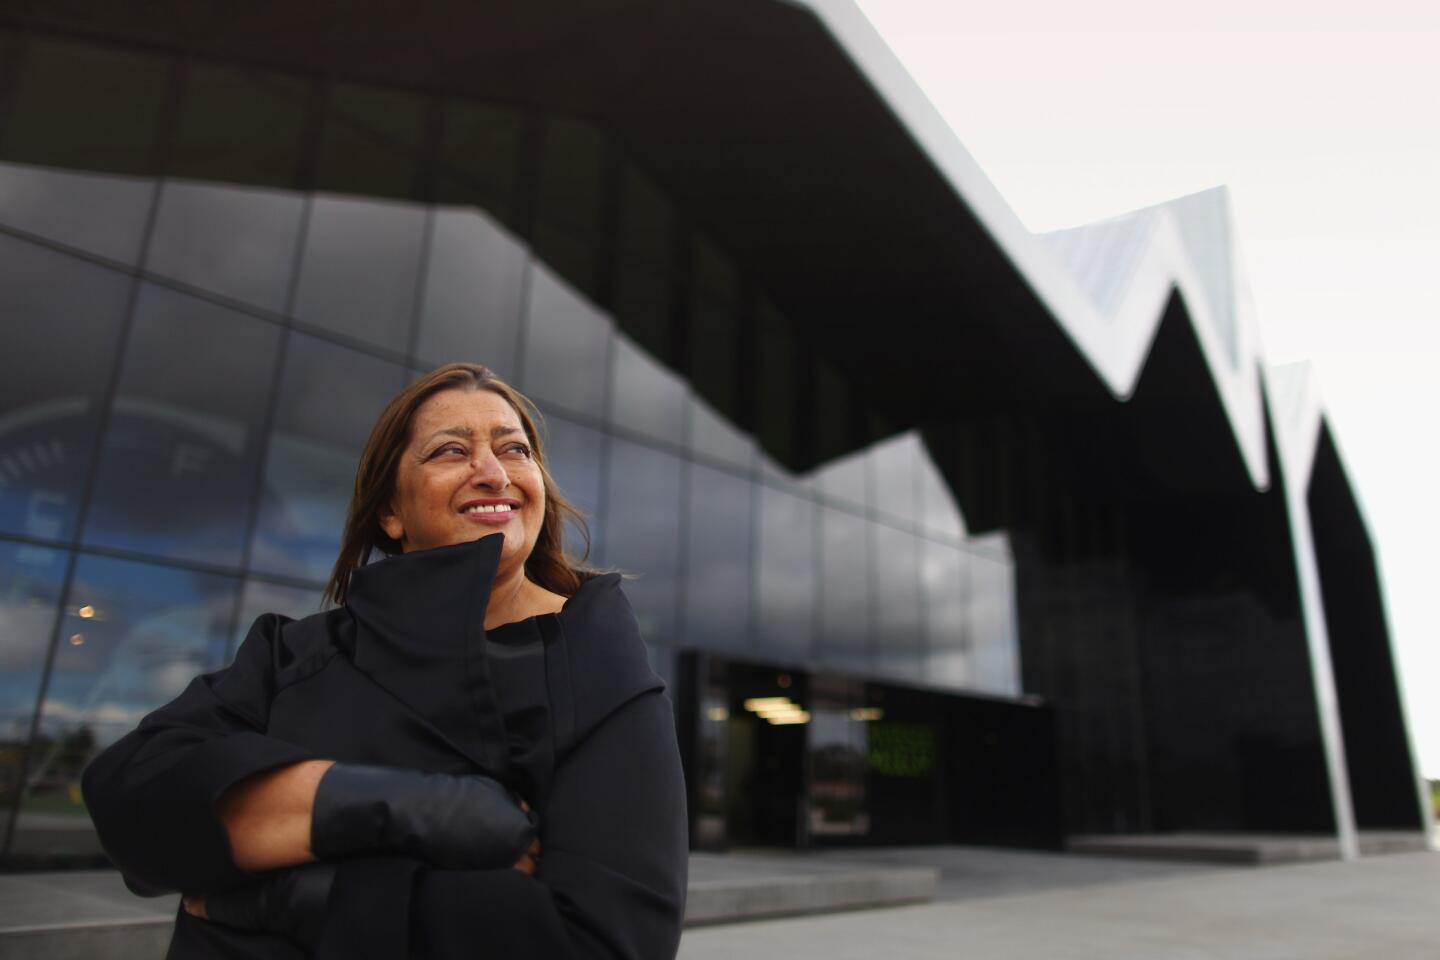 Zaha Hadid: Career in pictures